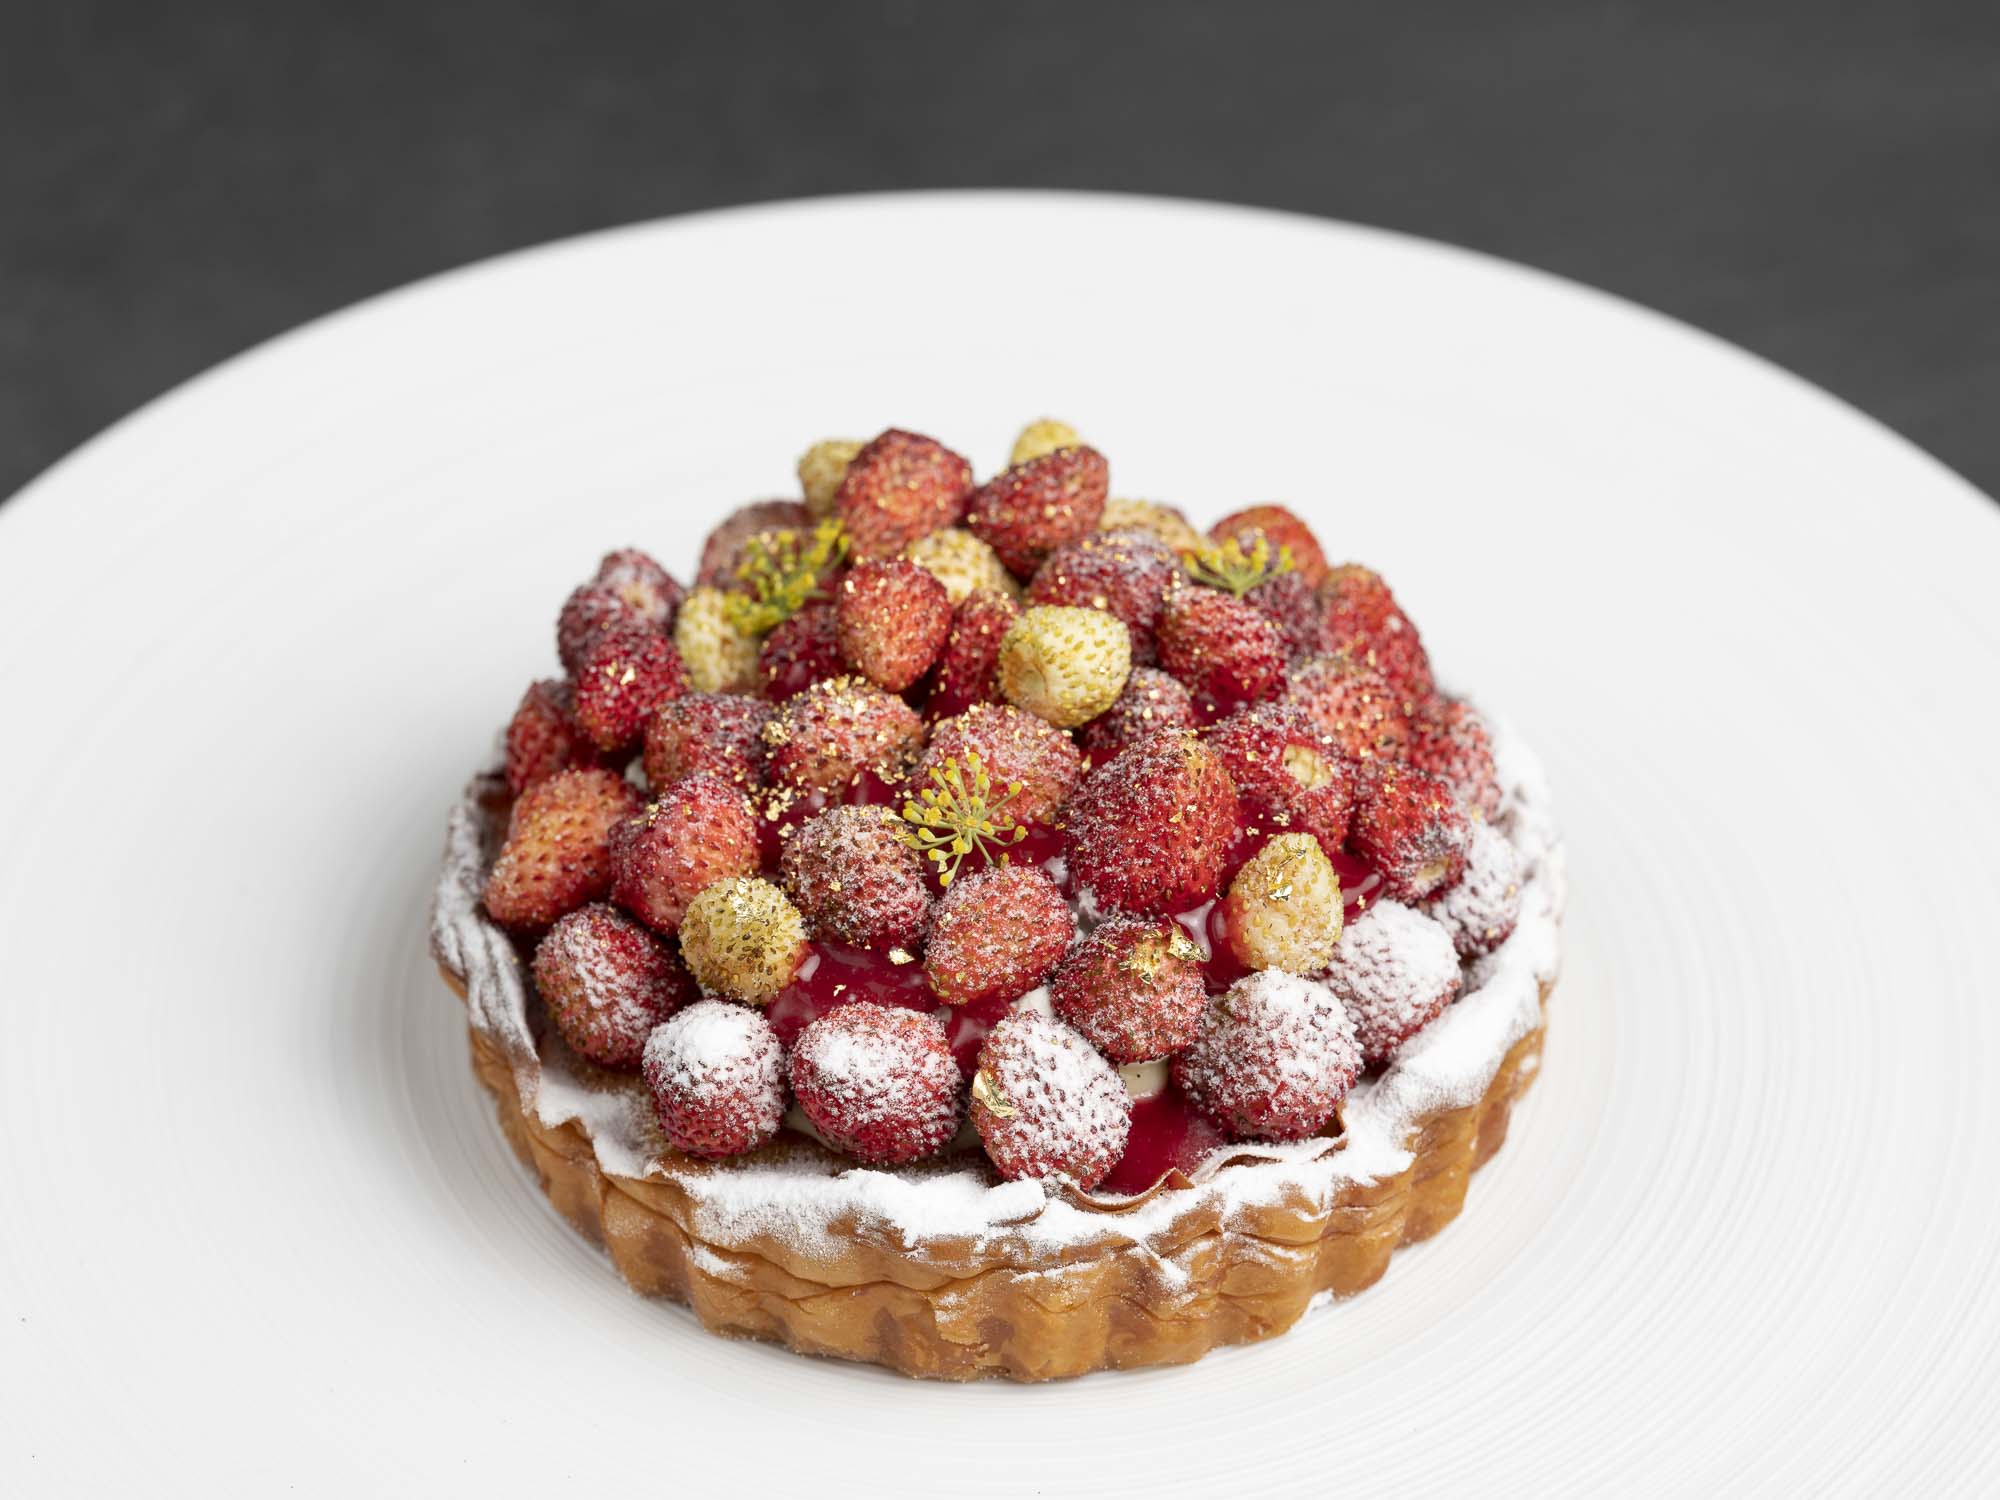 trate strawberry Food photography services photographer singapore Elle Vire - Chef Makoto – AMI Patisserie japanese